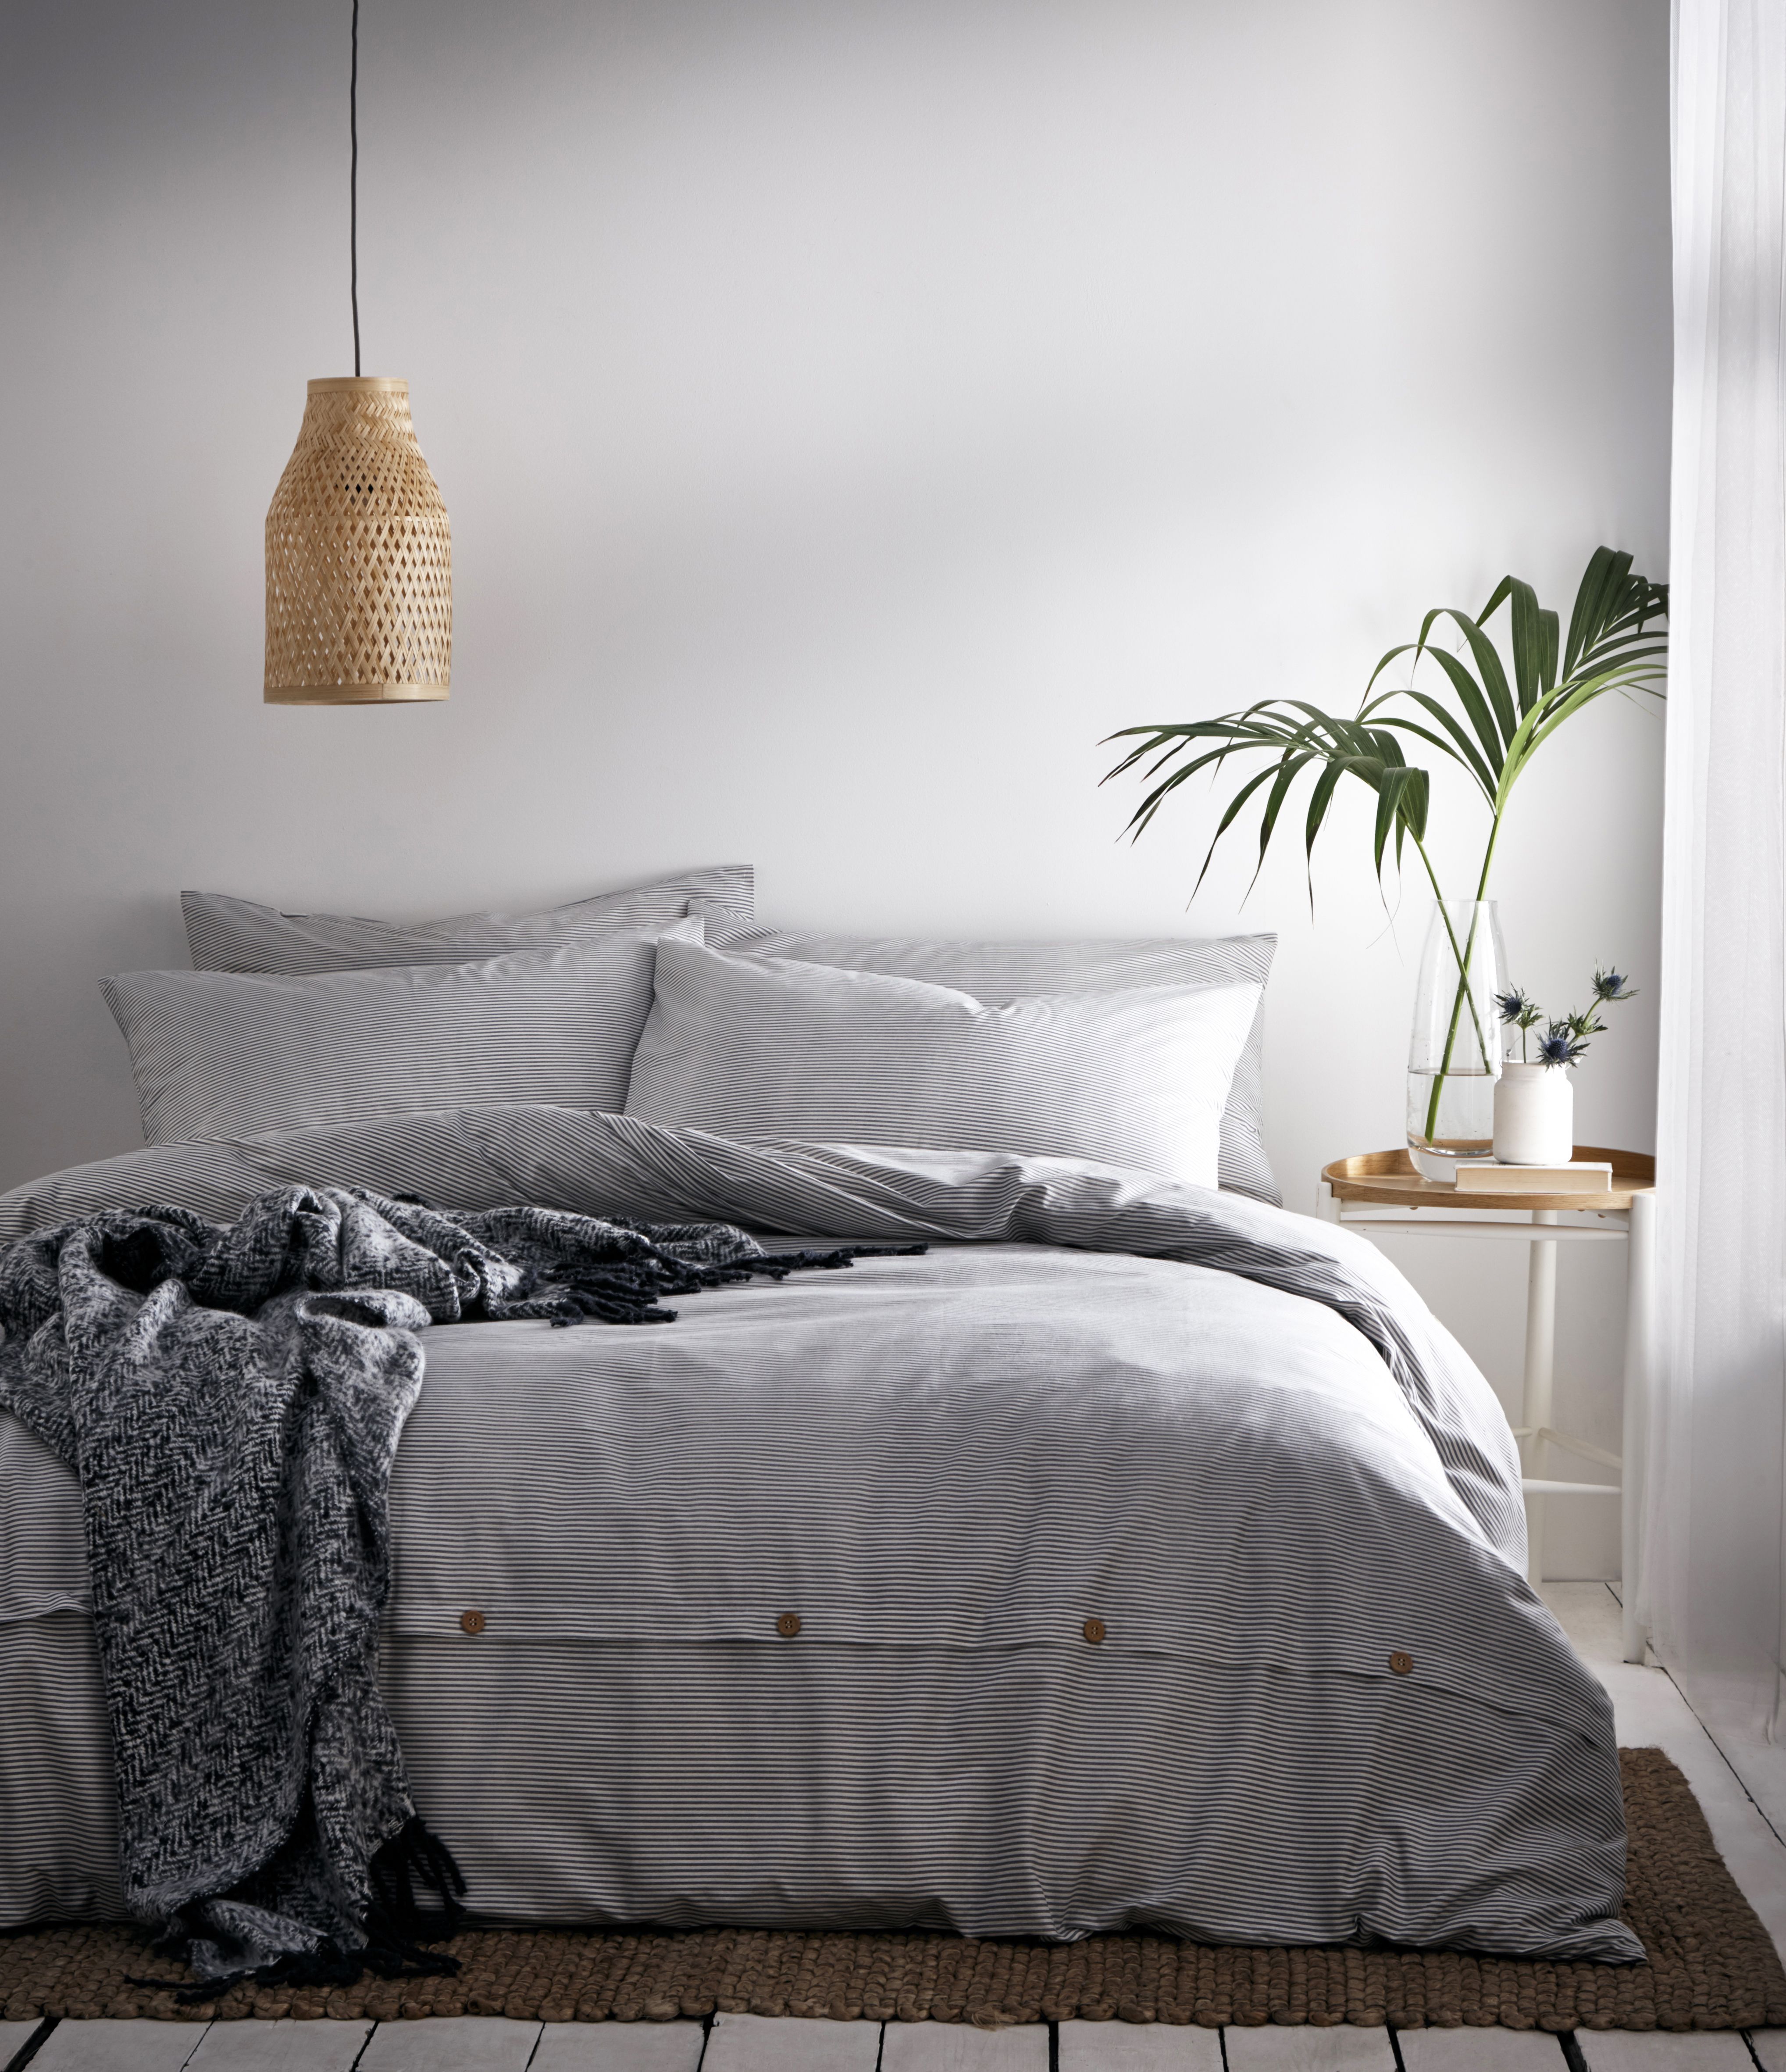 This duvet cover and pillow case set is both a classic but contemporary style, the subtle mélange print provides a luxurious woven striped appearance and the wooden button trim compliments the relaxed style. The Holbury duvet cover set has been garment washed and dried to give an ultra-soft, tumbled finish which gets softer with every wash at home.